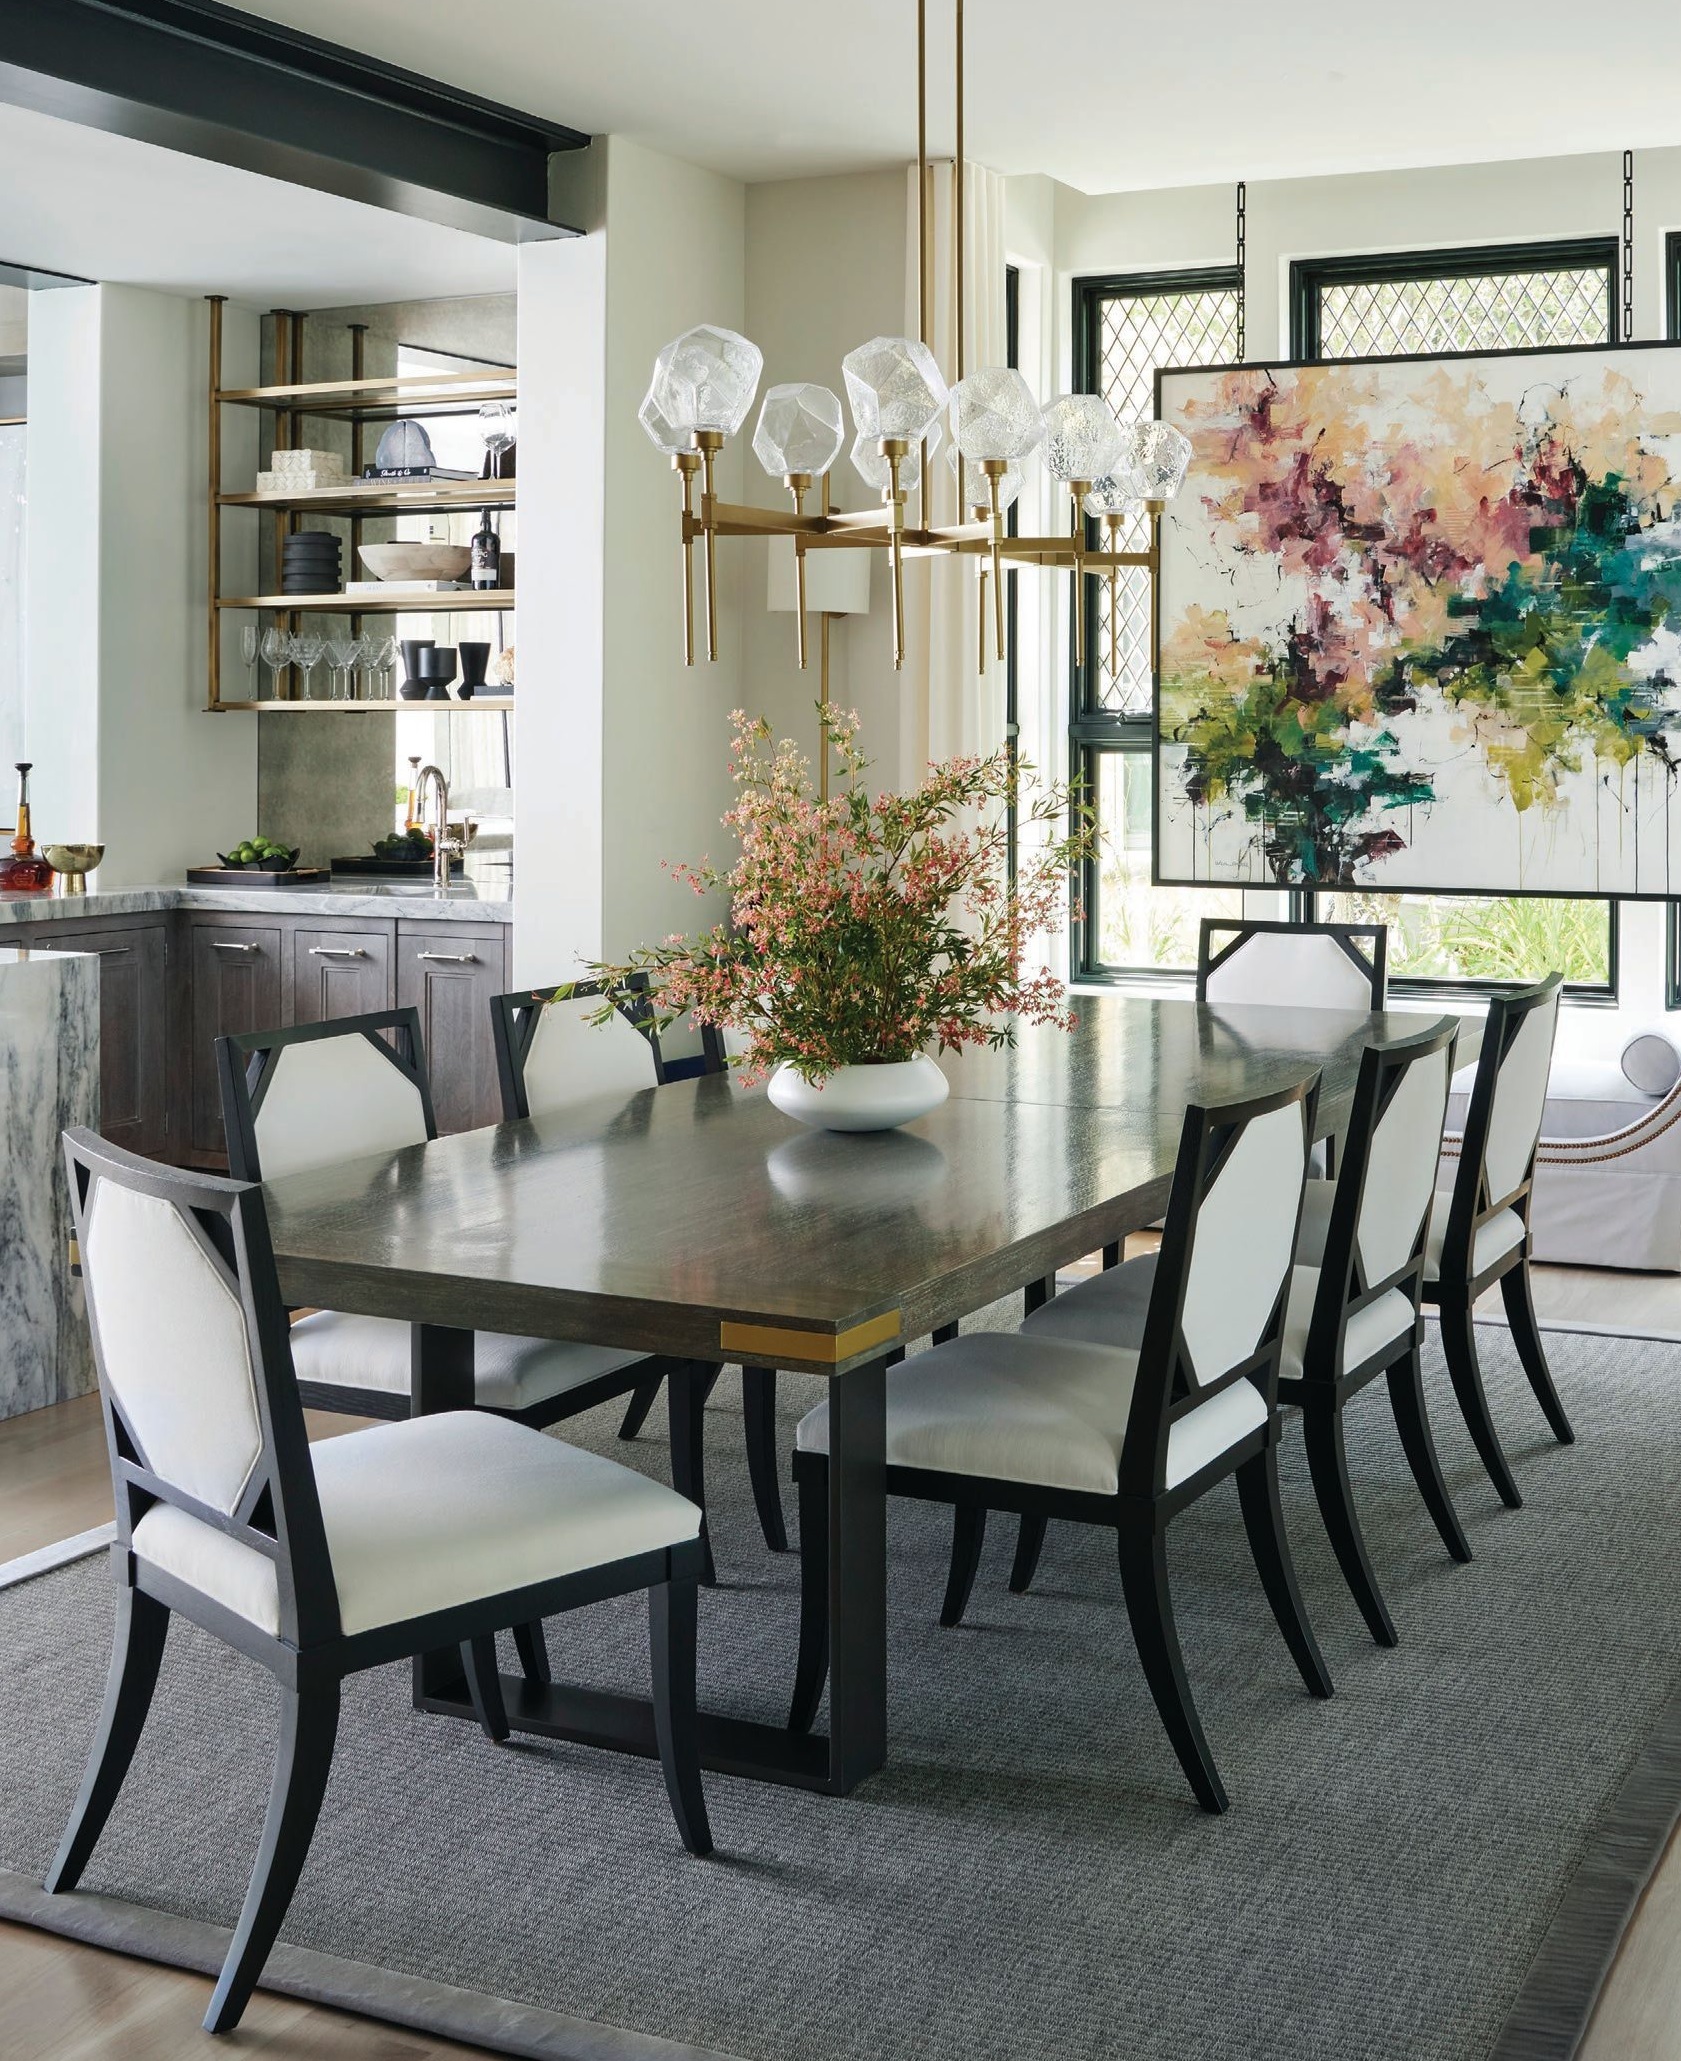 A custom hand-forged iron trestle table with metal corner details by deAurora takes pride of place in the dining room, which also features Hammerton Studio’s Gem linear chandelier and striking commissioned art piece “Beyond the Garden Gate” by Carlos Ramirez. Photographed by Werner Straube